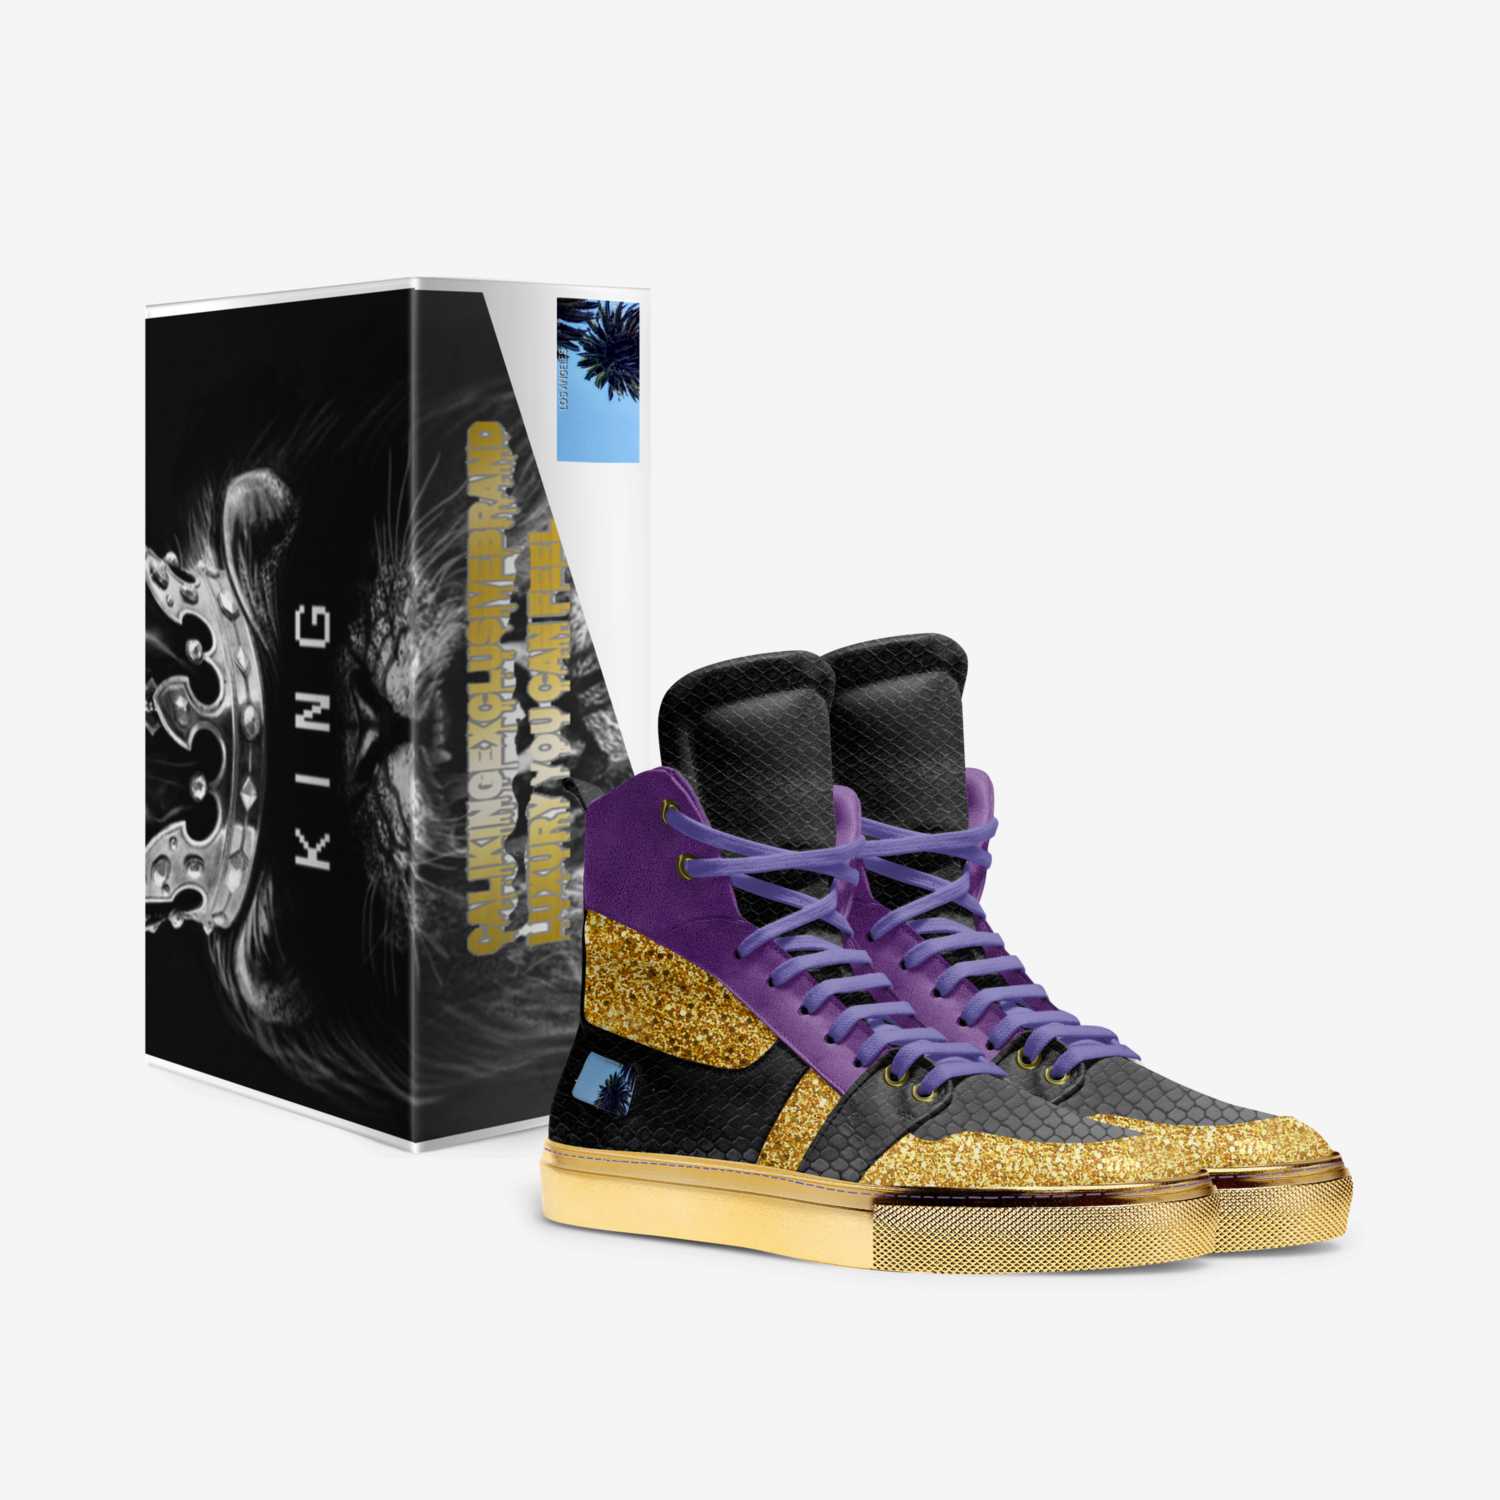 Mamba mentality custom made in Italy shoes by Cameron Mabins | Box view